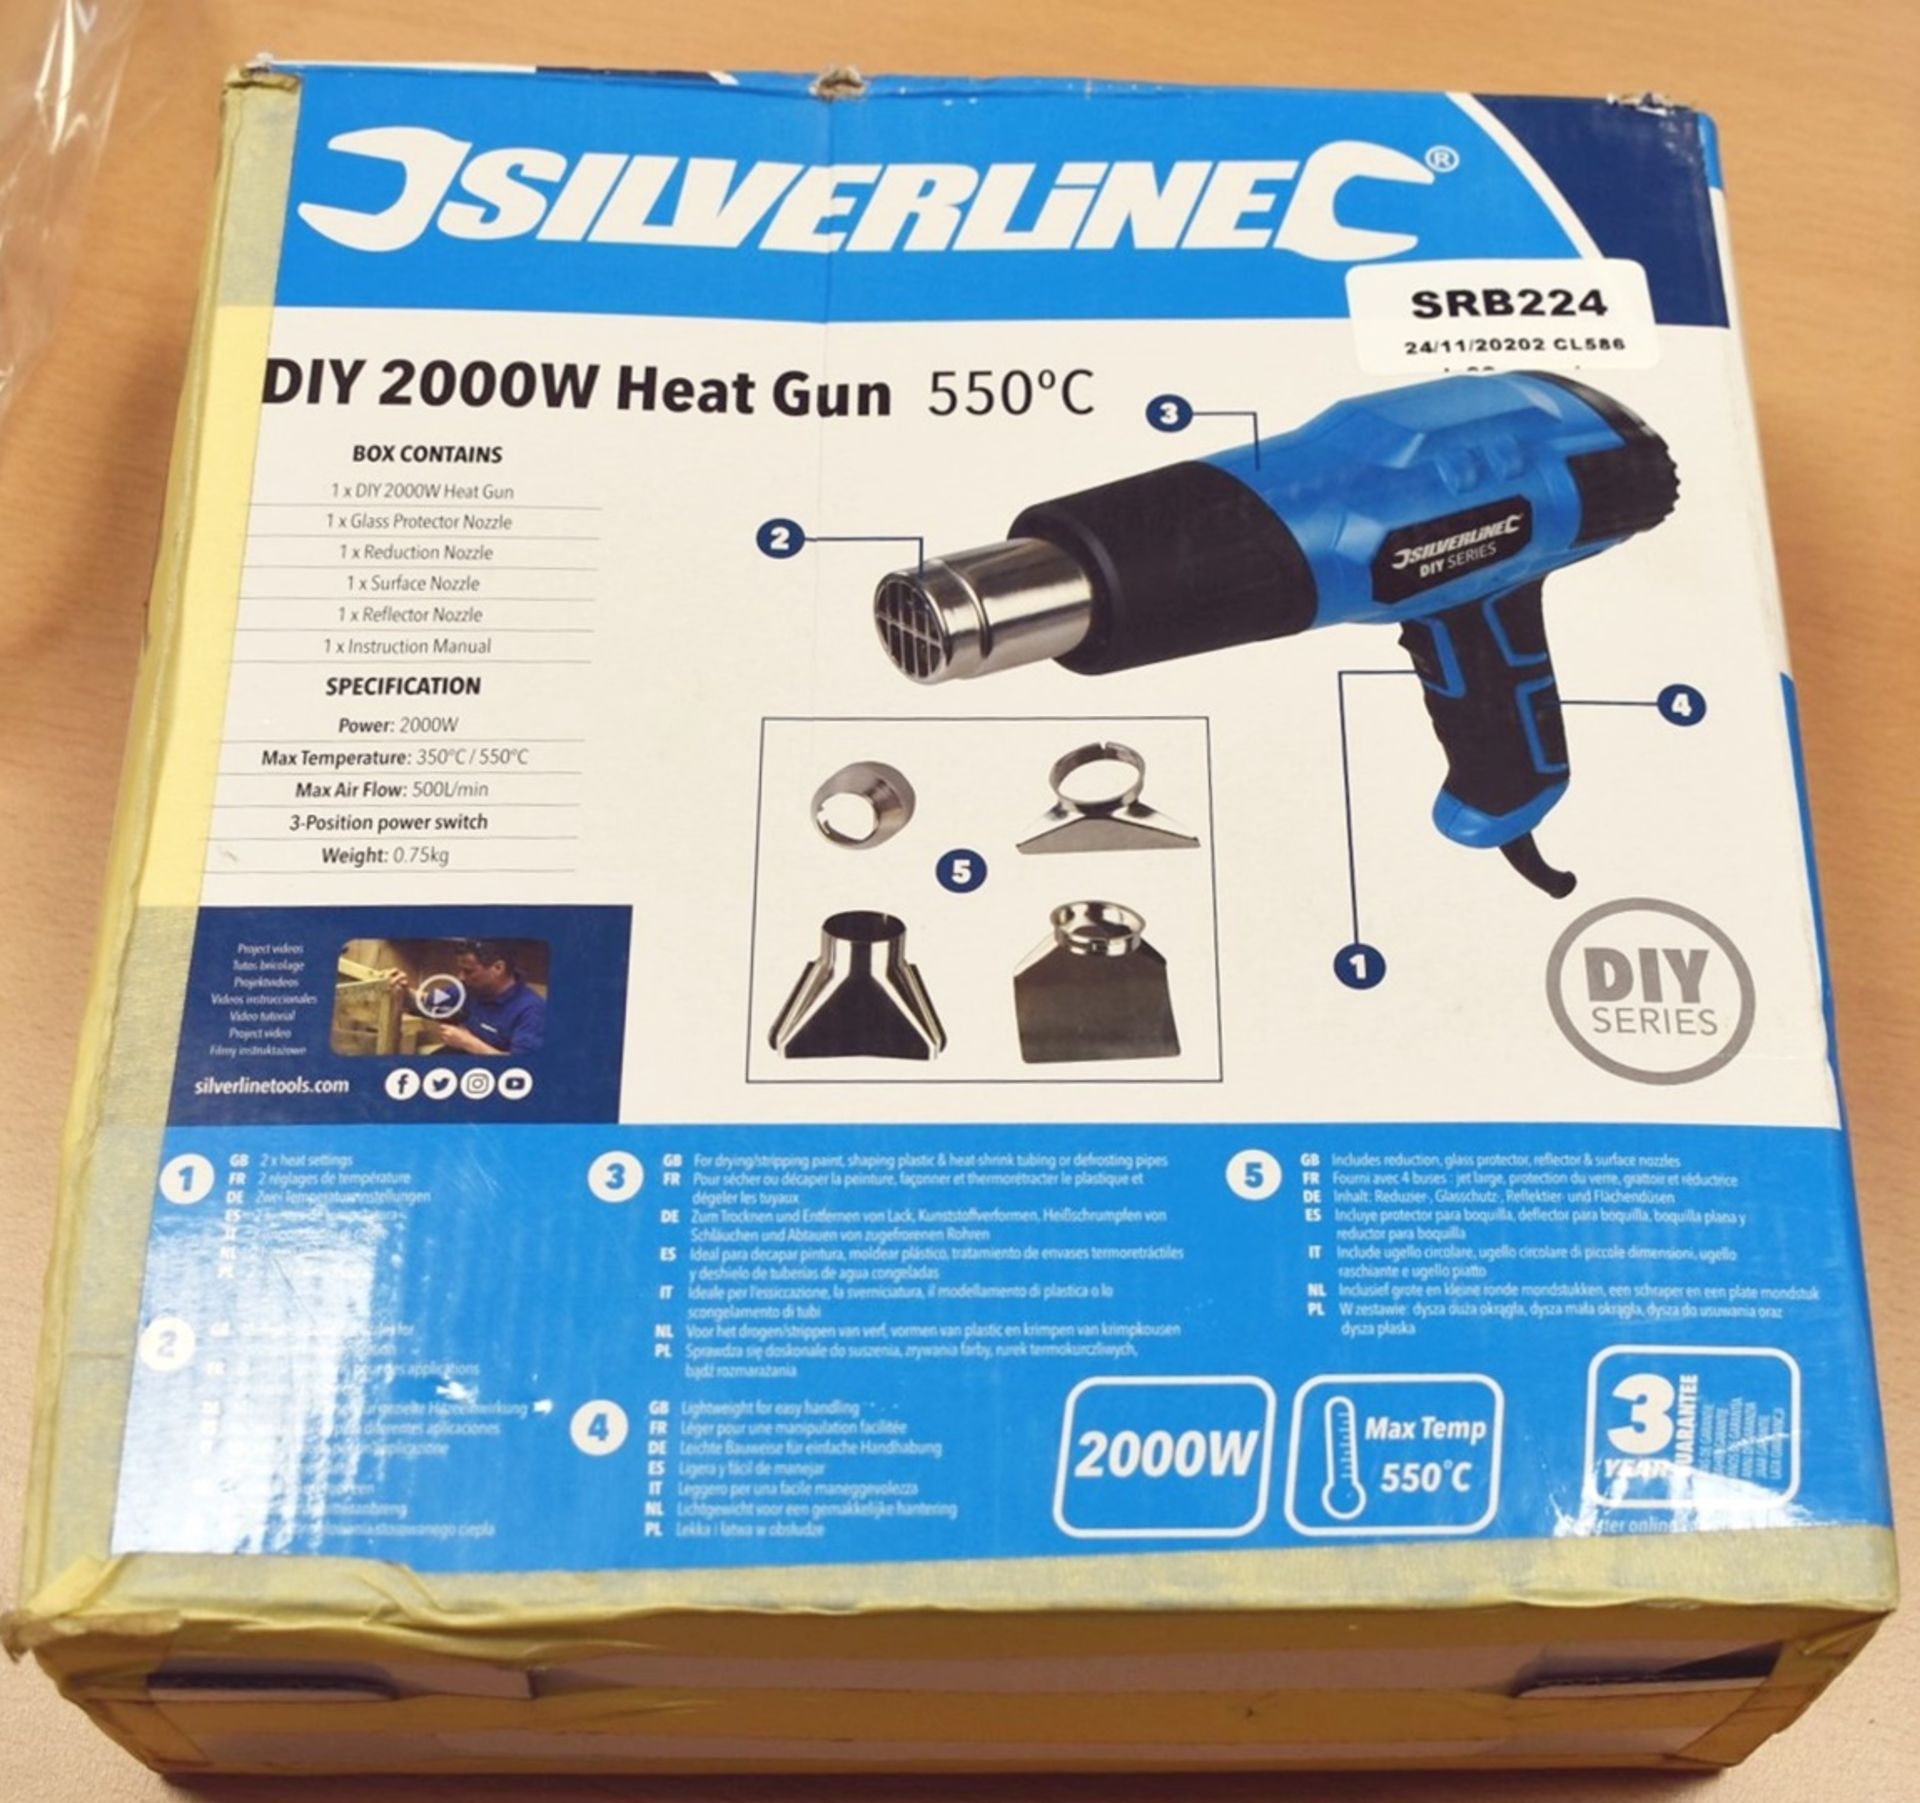 1 x Silverline DIY 200w 550c Heat Gun - Boxed With Accessories - Image 6 of 6